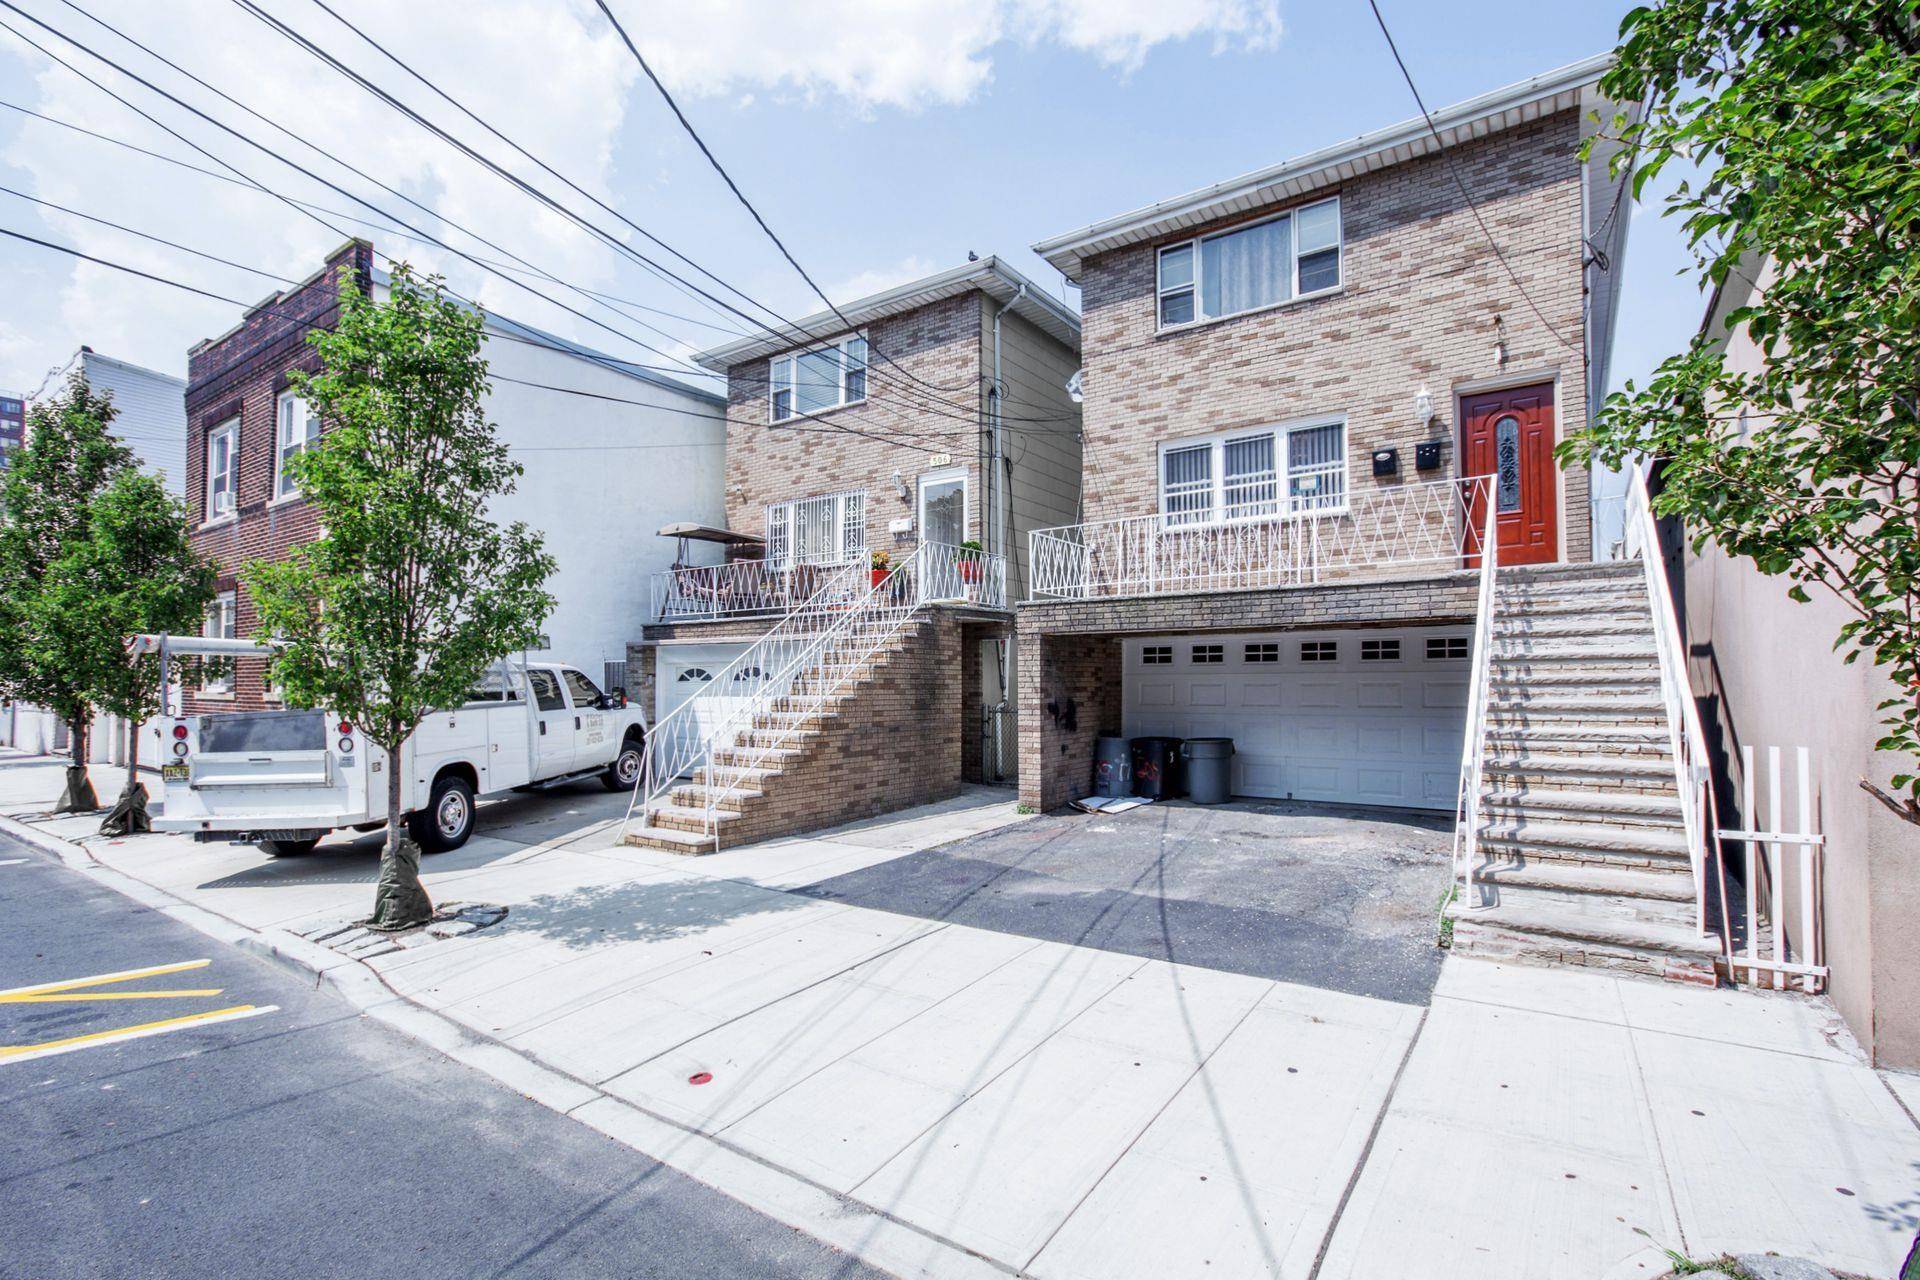 504 5TH ST Multi-Family New Jersey